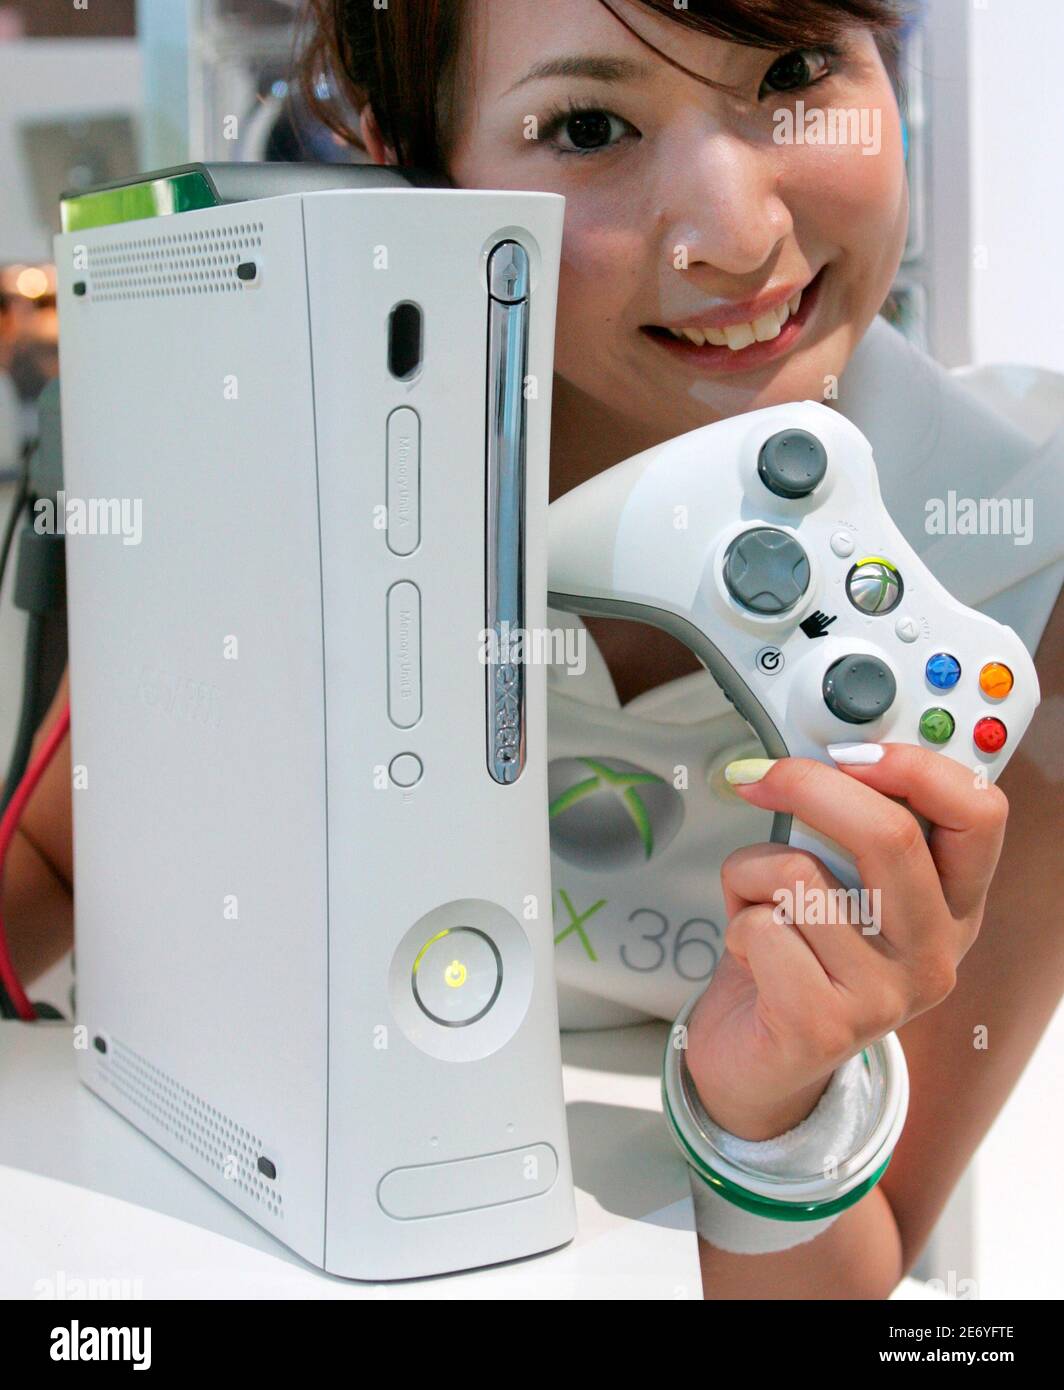 A model displays Microsoft Corp's next-generation Xbox 360 video game  console at Tokyo Game Show 2005, Japan's biggest video game software  exhibition, at Makuhari Messe Convention Centre in Chiba, east of Tokyo